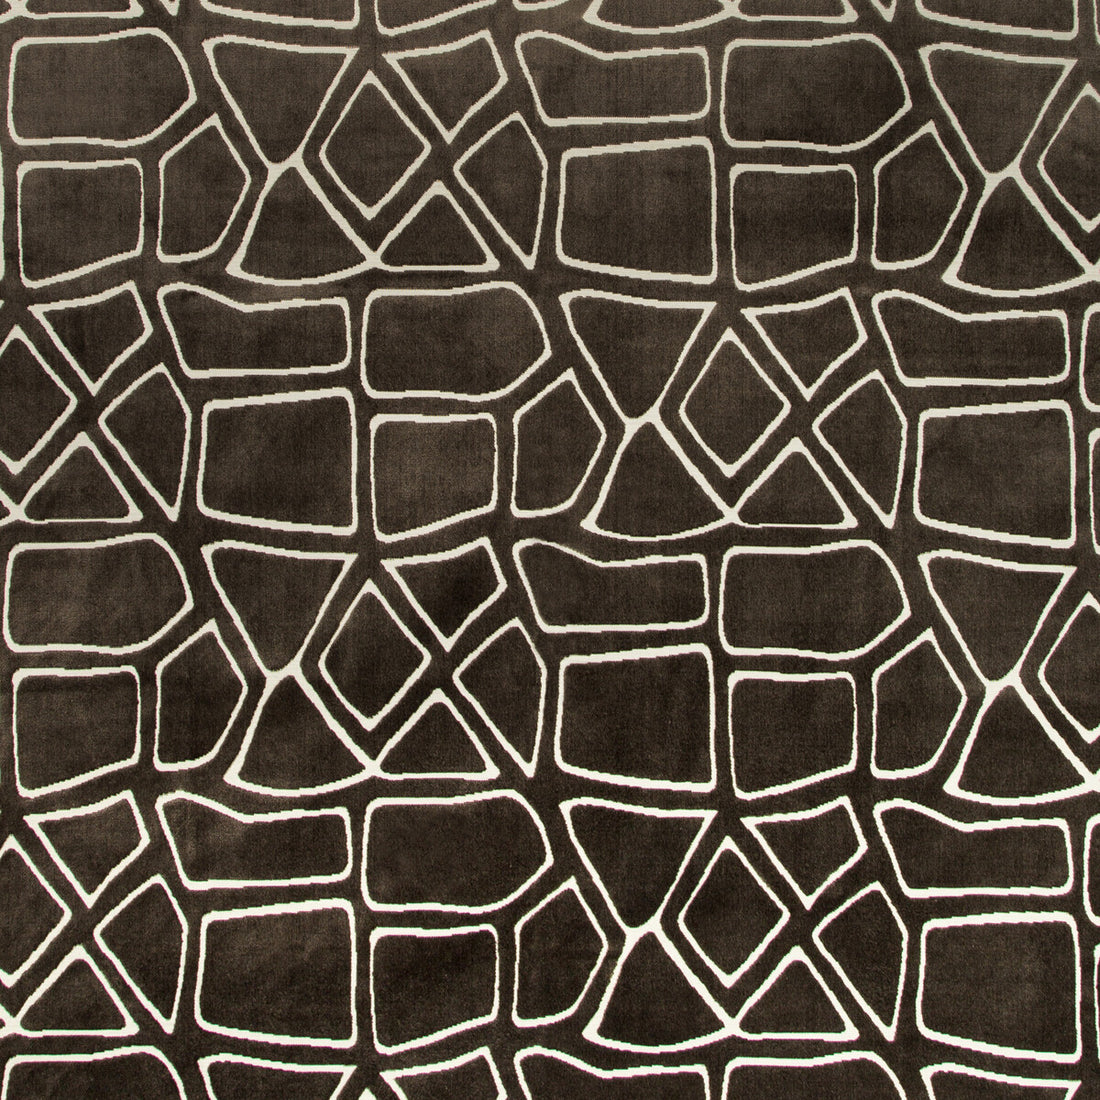 Mural Velvet fabric in java color - pattern 35508.66.0 - by Kravet Design in the Barclay Butera Sagamore collection